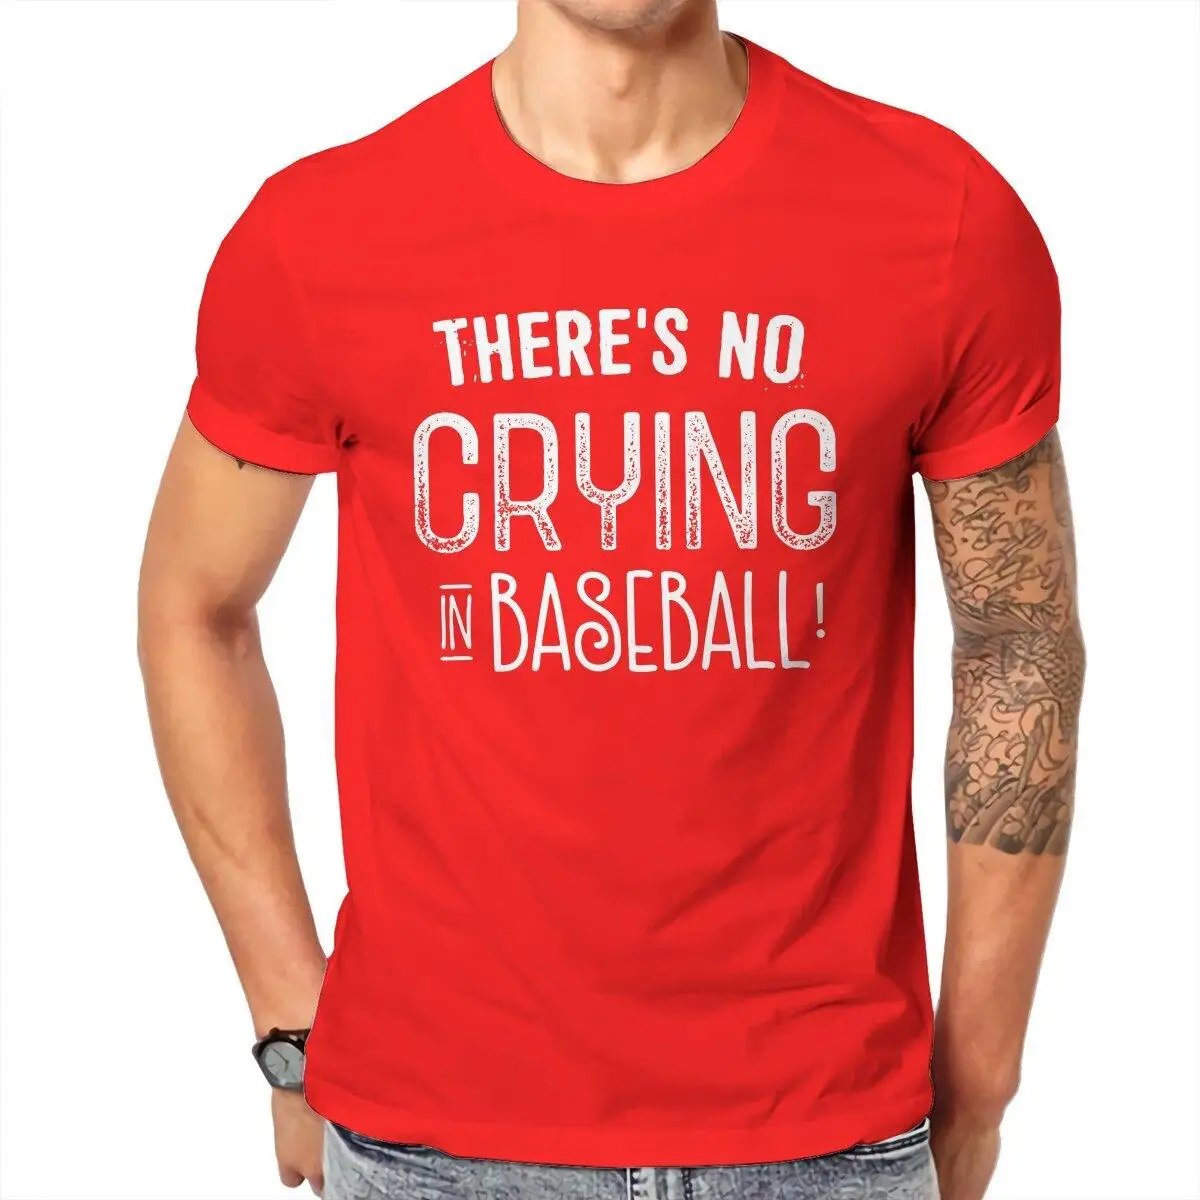 There Is No Crying In Baseball A League Of Their Own T-Shirt for Men Cotton T Shirt Short Sleeve Tee Shirt Gift Idea Clothes